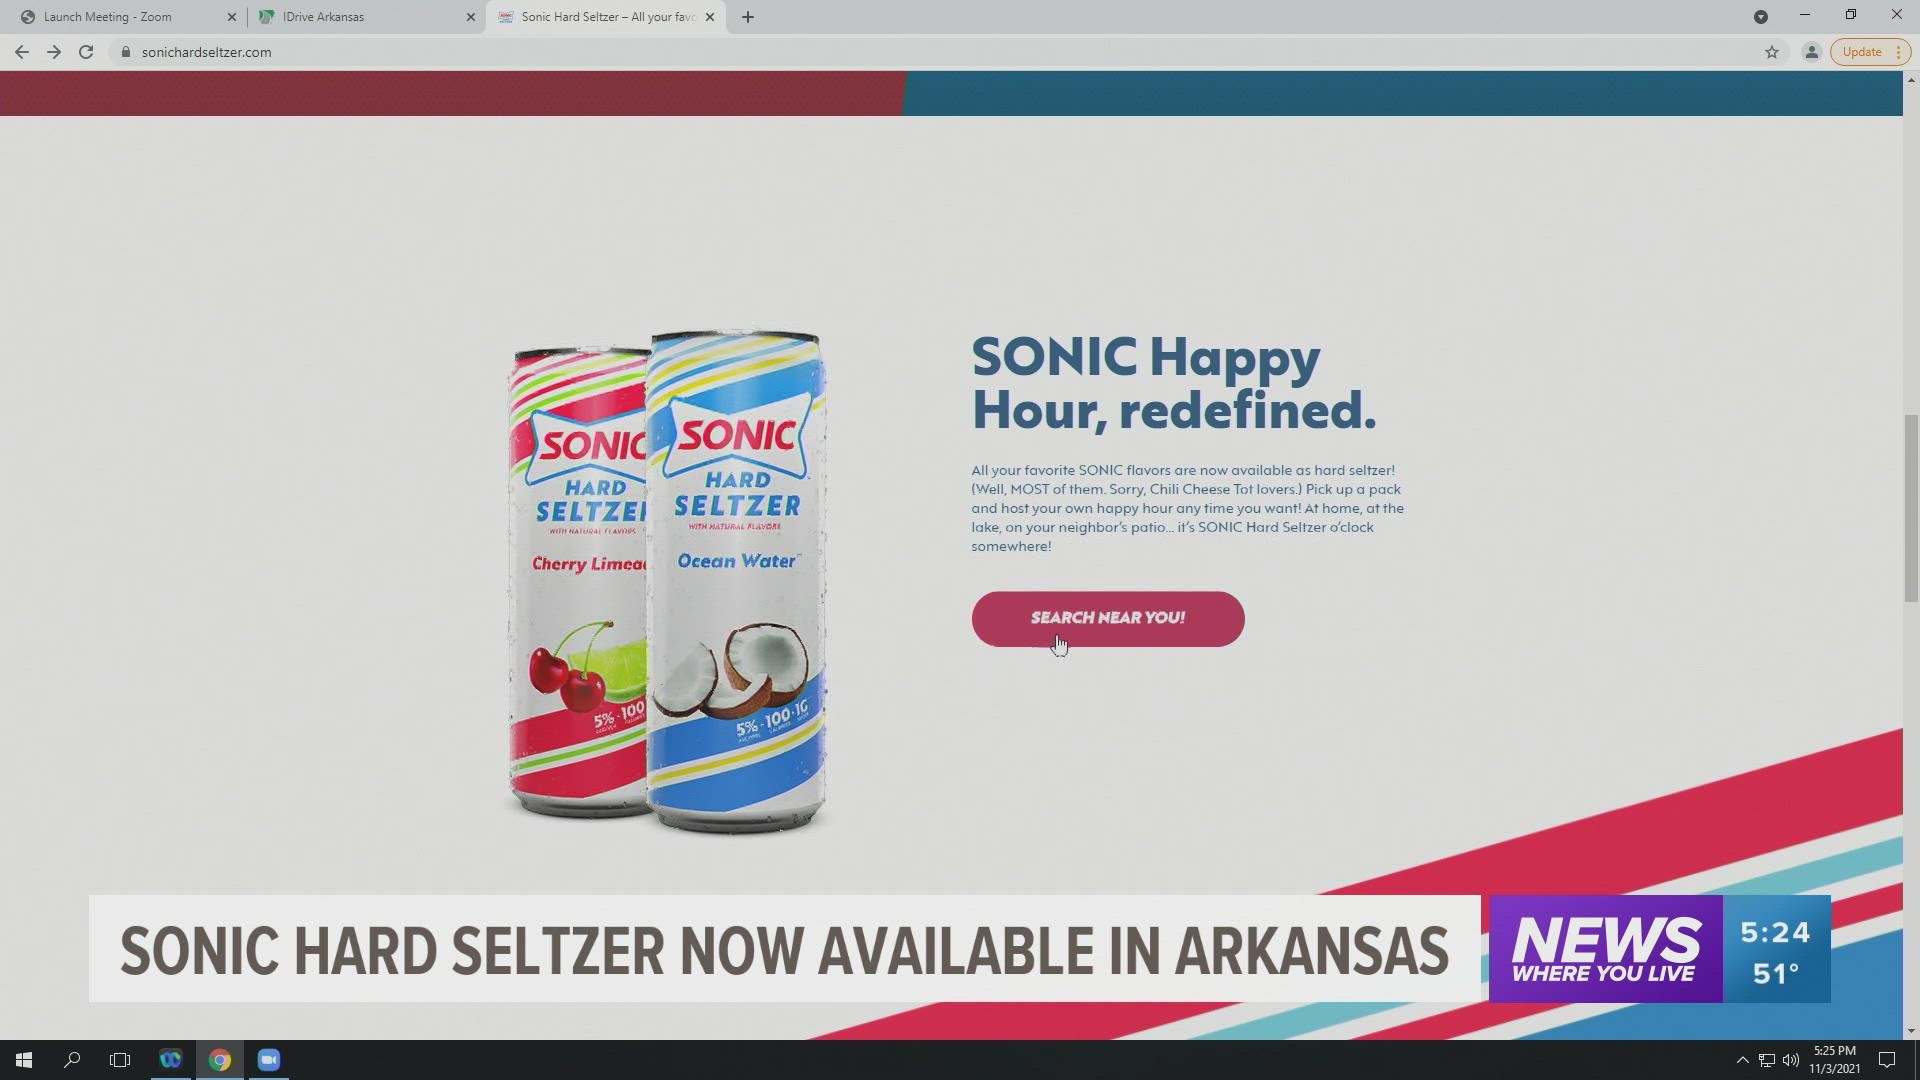 The seltzers will be available at select retailers across the seven states but will not be available at SONIC Drive-In locations.